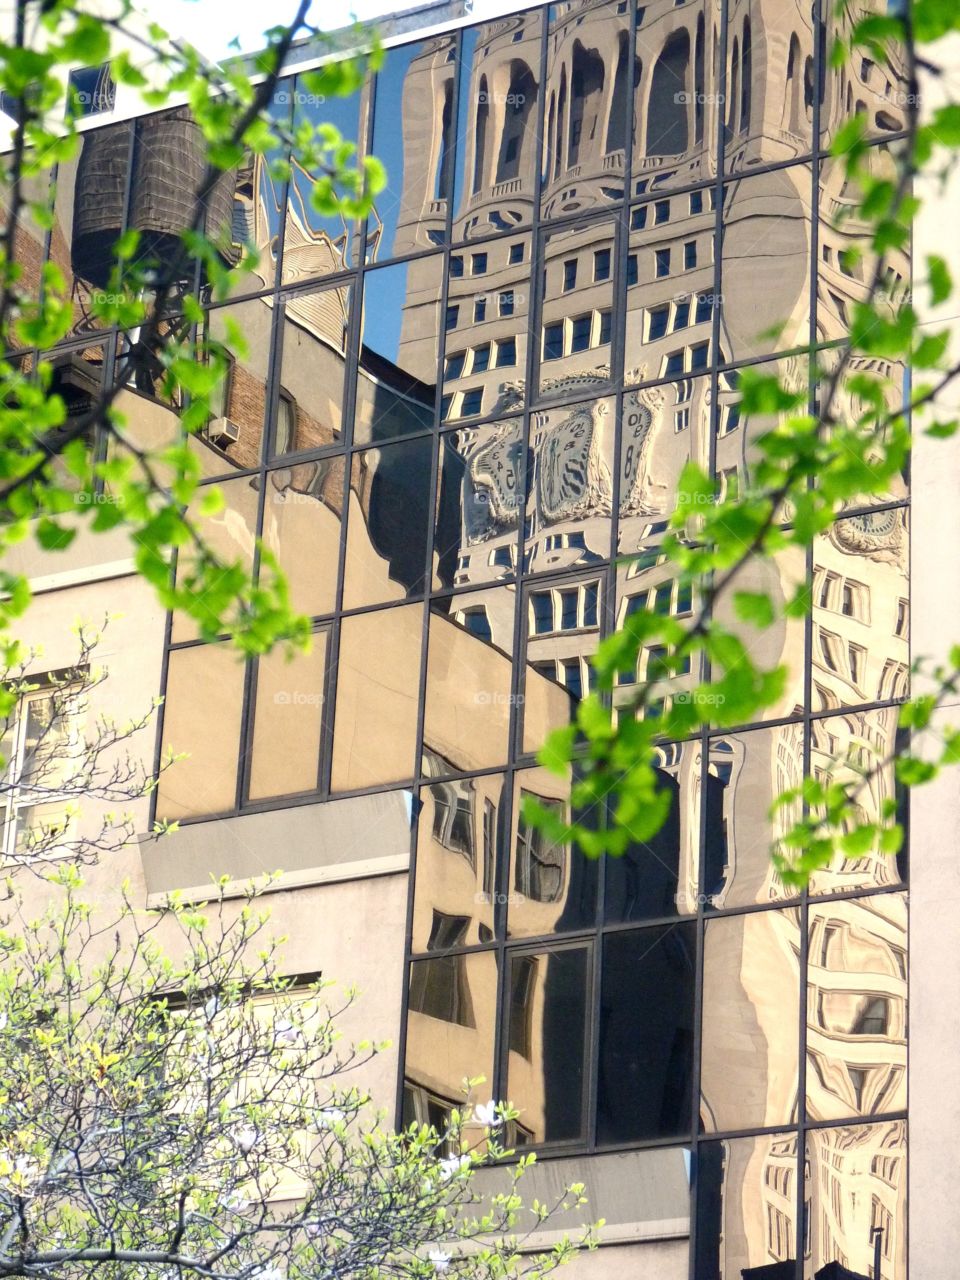 Spring Reflections. Spring trees and buildings reflected in glass exterior